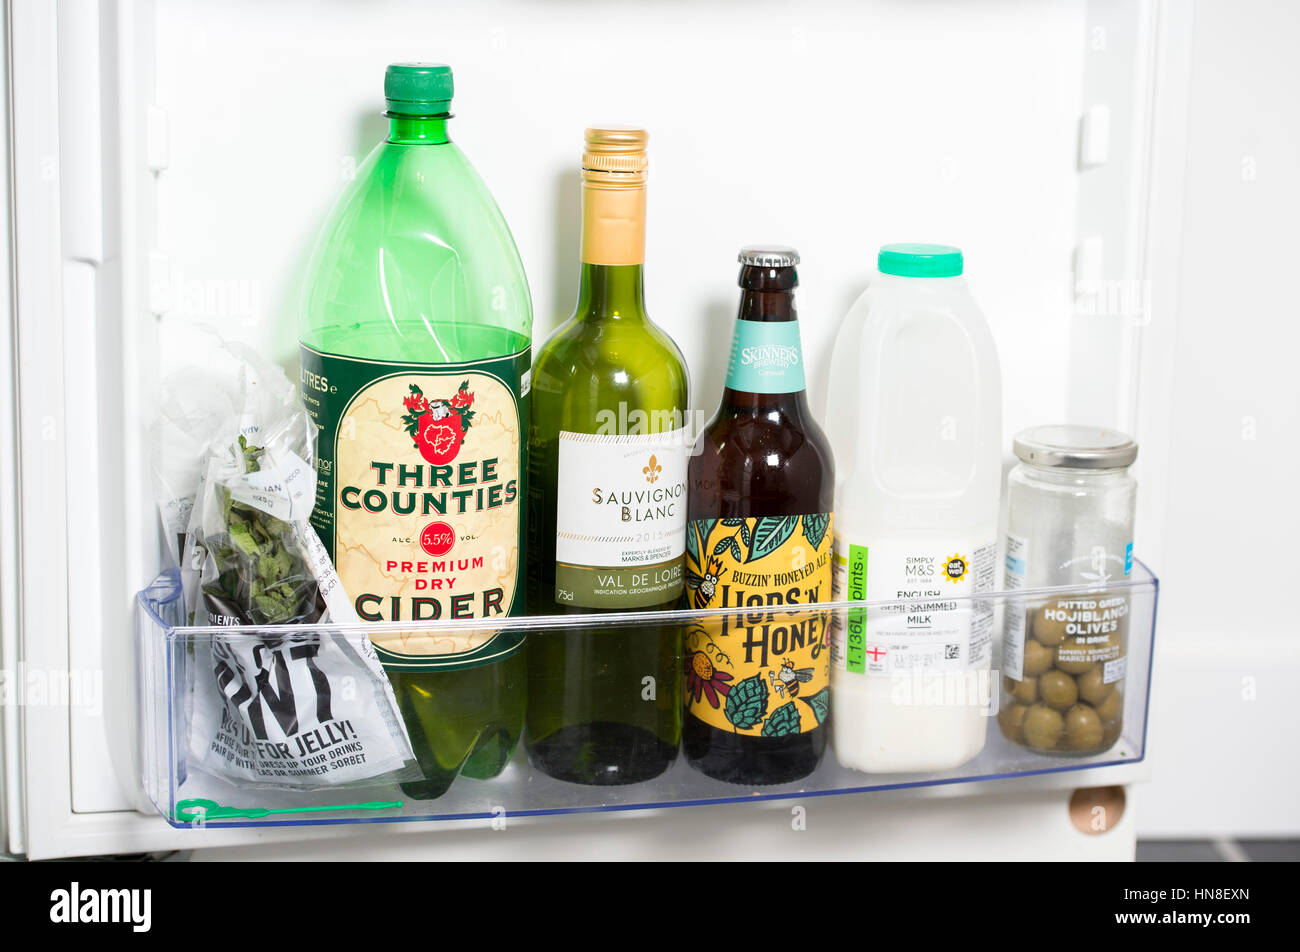 https://c8.alamy.com/comp/HN8EXN/contents-of-a-fridge-including-a-bottle-of-wine-beer-and-cider-HN8EXN.jpg